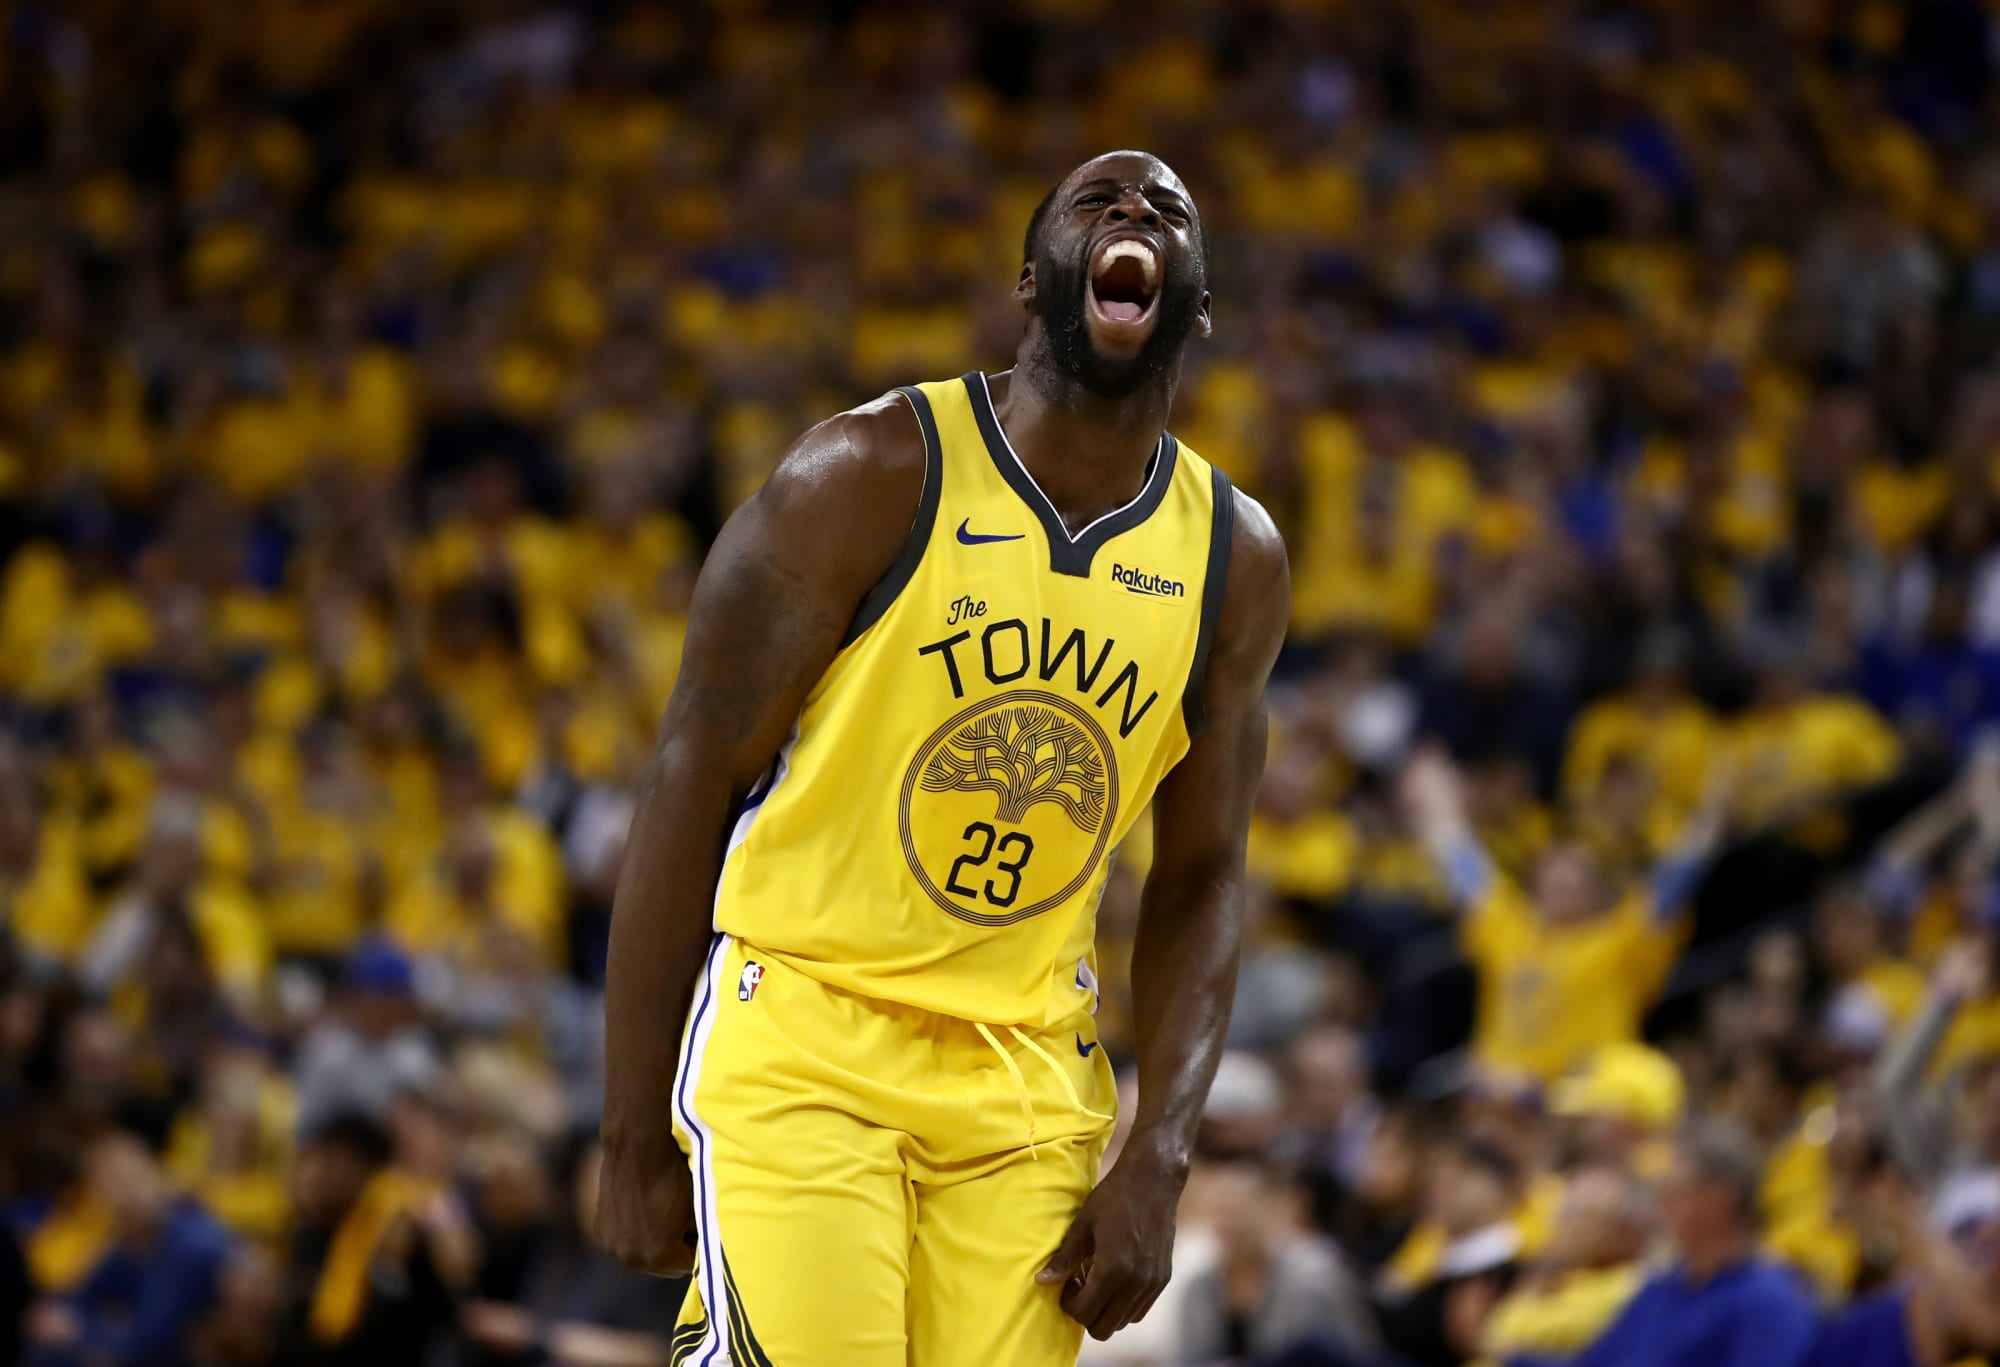 Warriors: Draymond Green claims to be the defender ever. Is he?